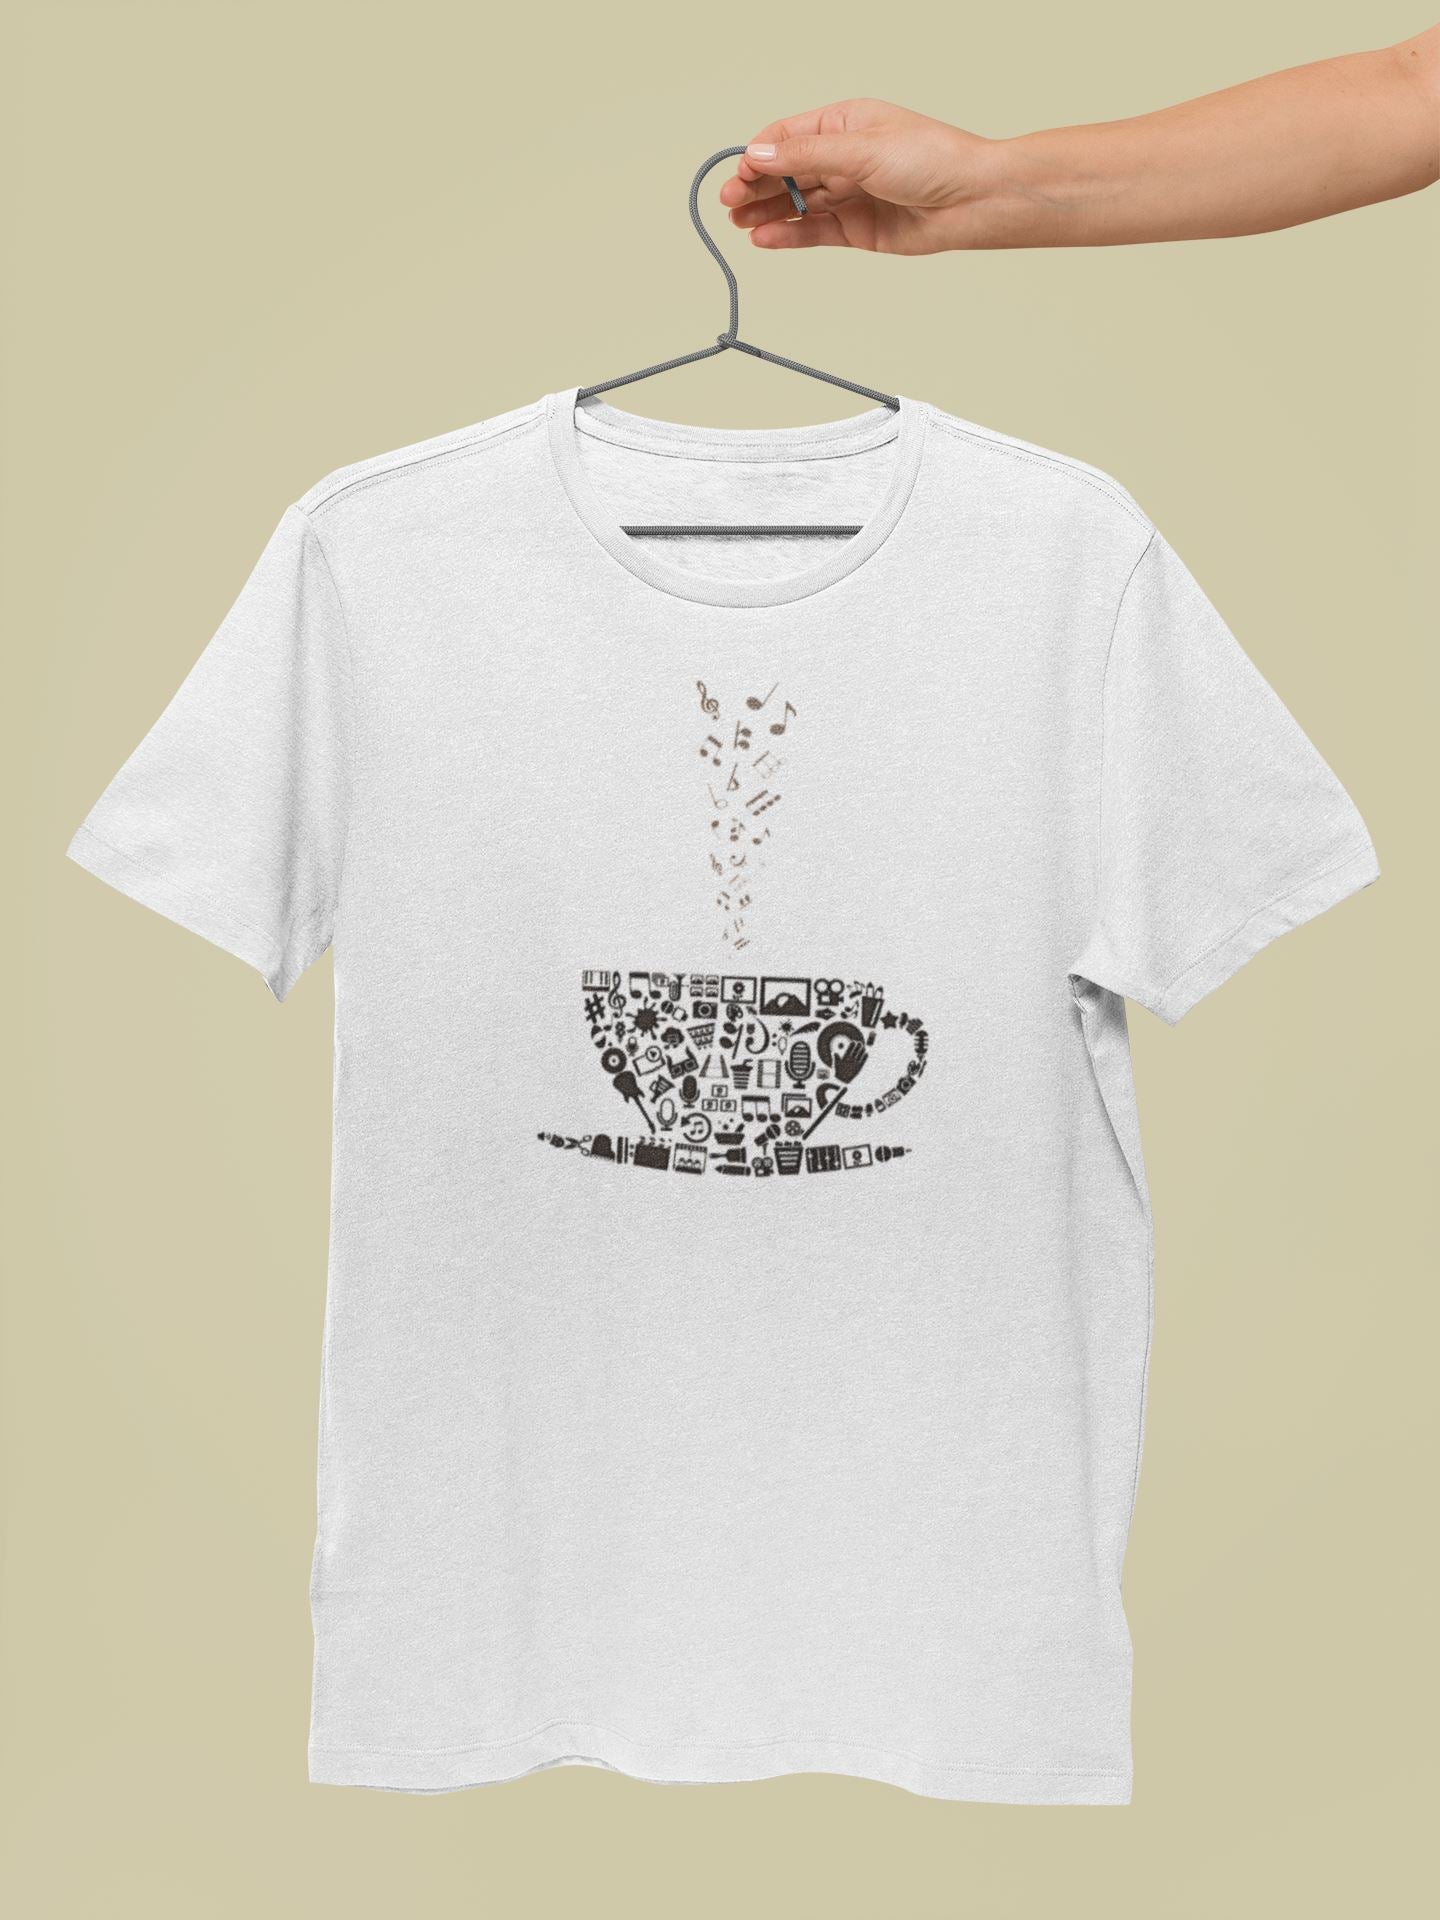 A Cup of Chai Full of Music Supreme White T Shirt for Men and Women freeshipping - Catch My Drift India